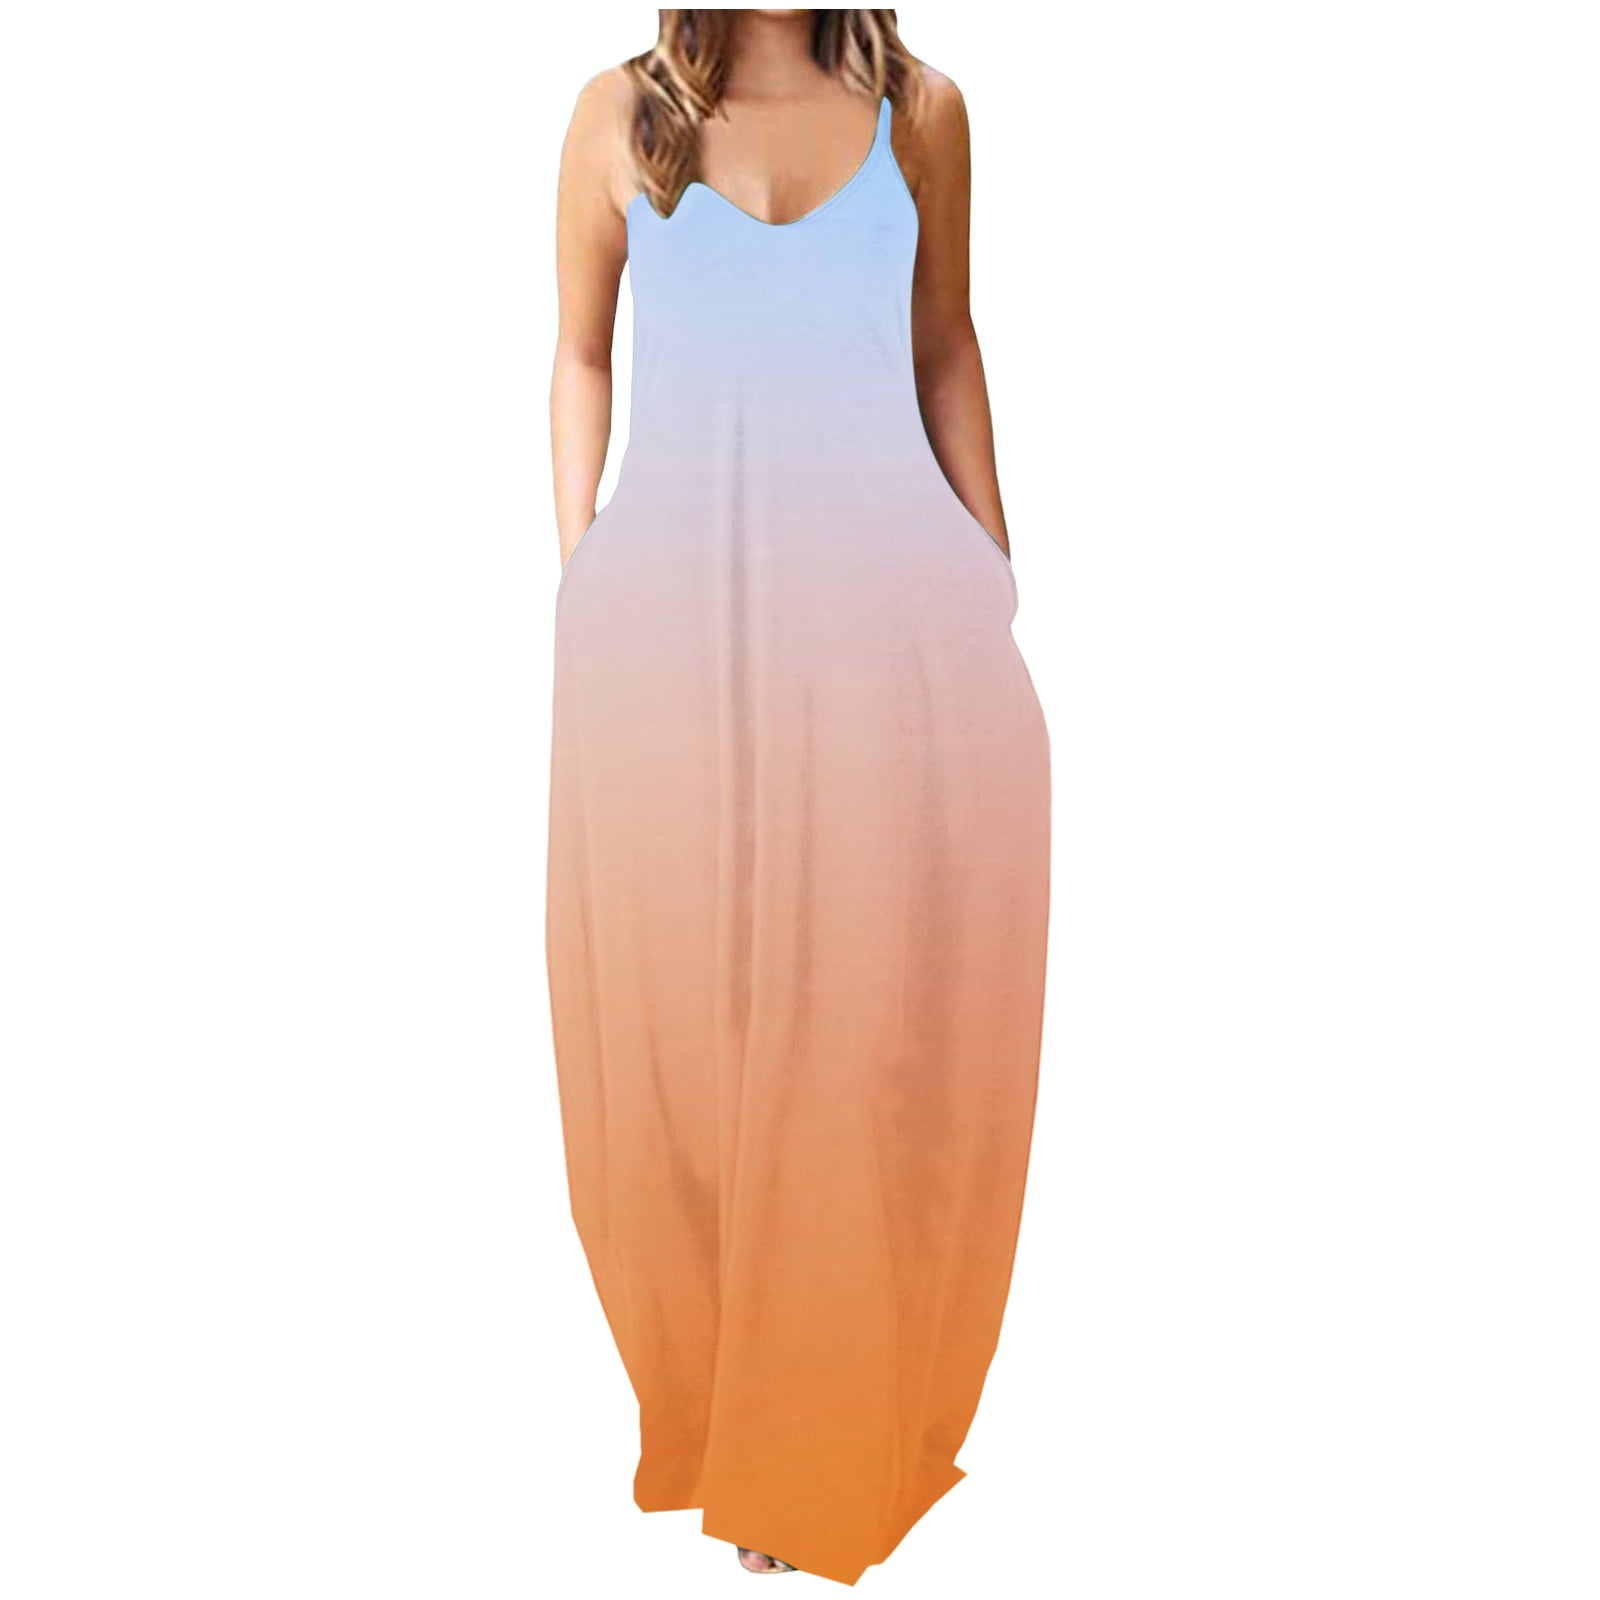 Gosuguu Long Maxi Dress for Women, Summer Sun Dresses with Pockets Spaghetti Strap Sleeveless Floral Casual Wedding Guest Dresses #Todays Daily Deals